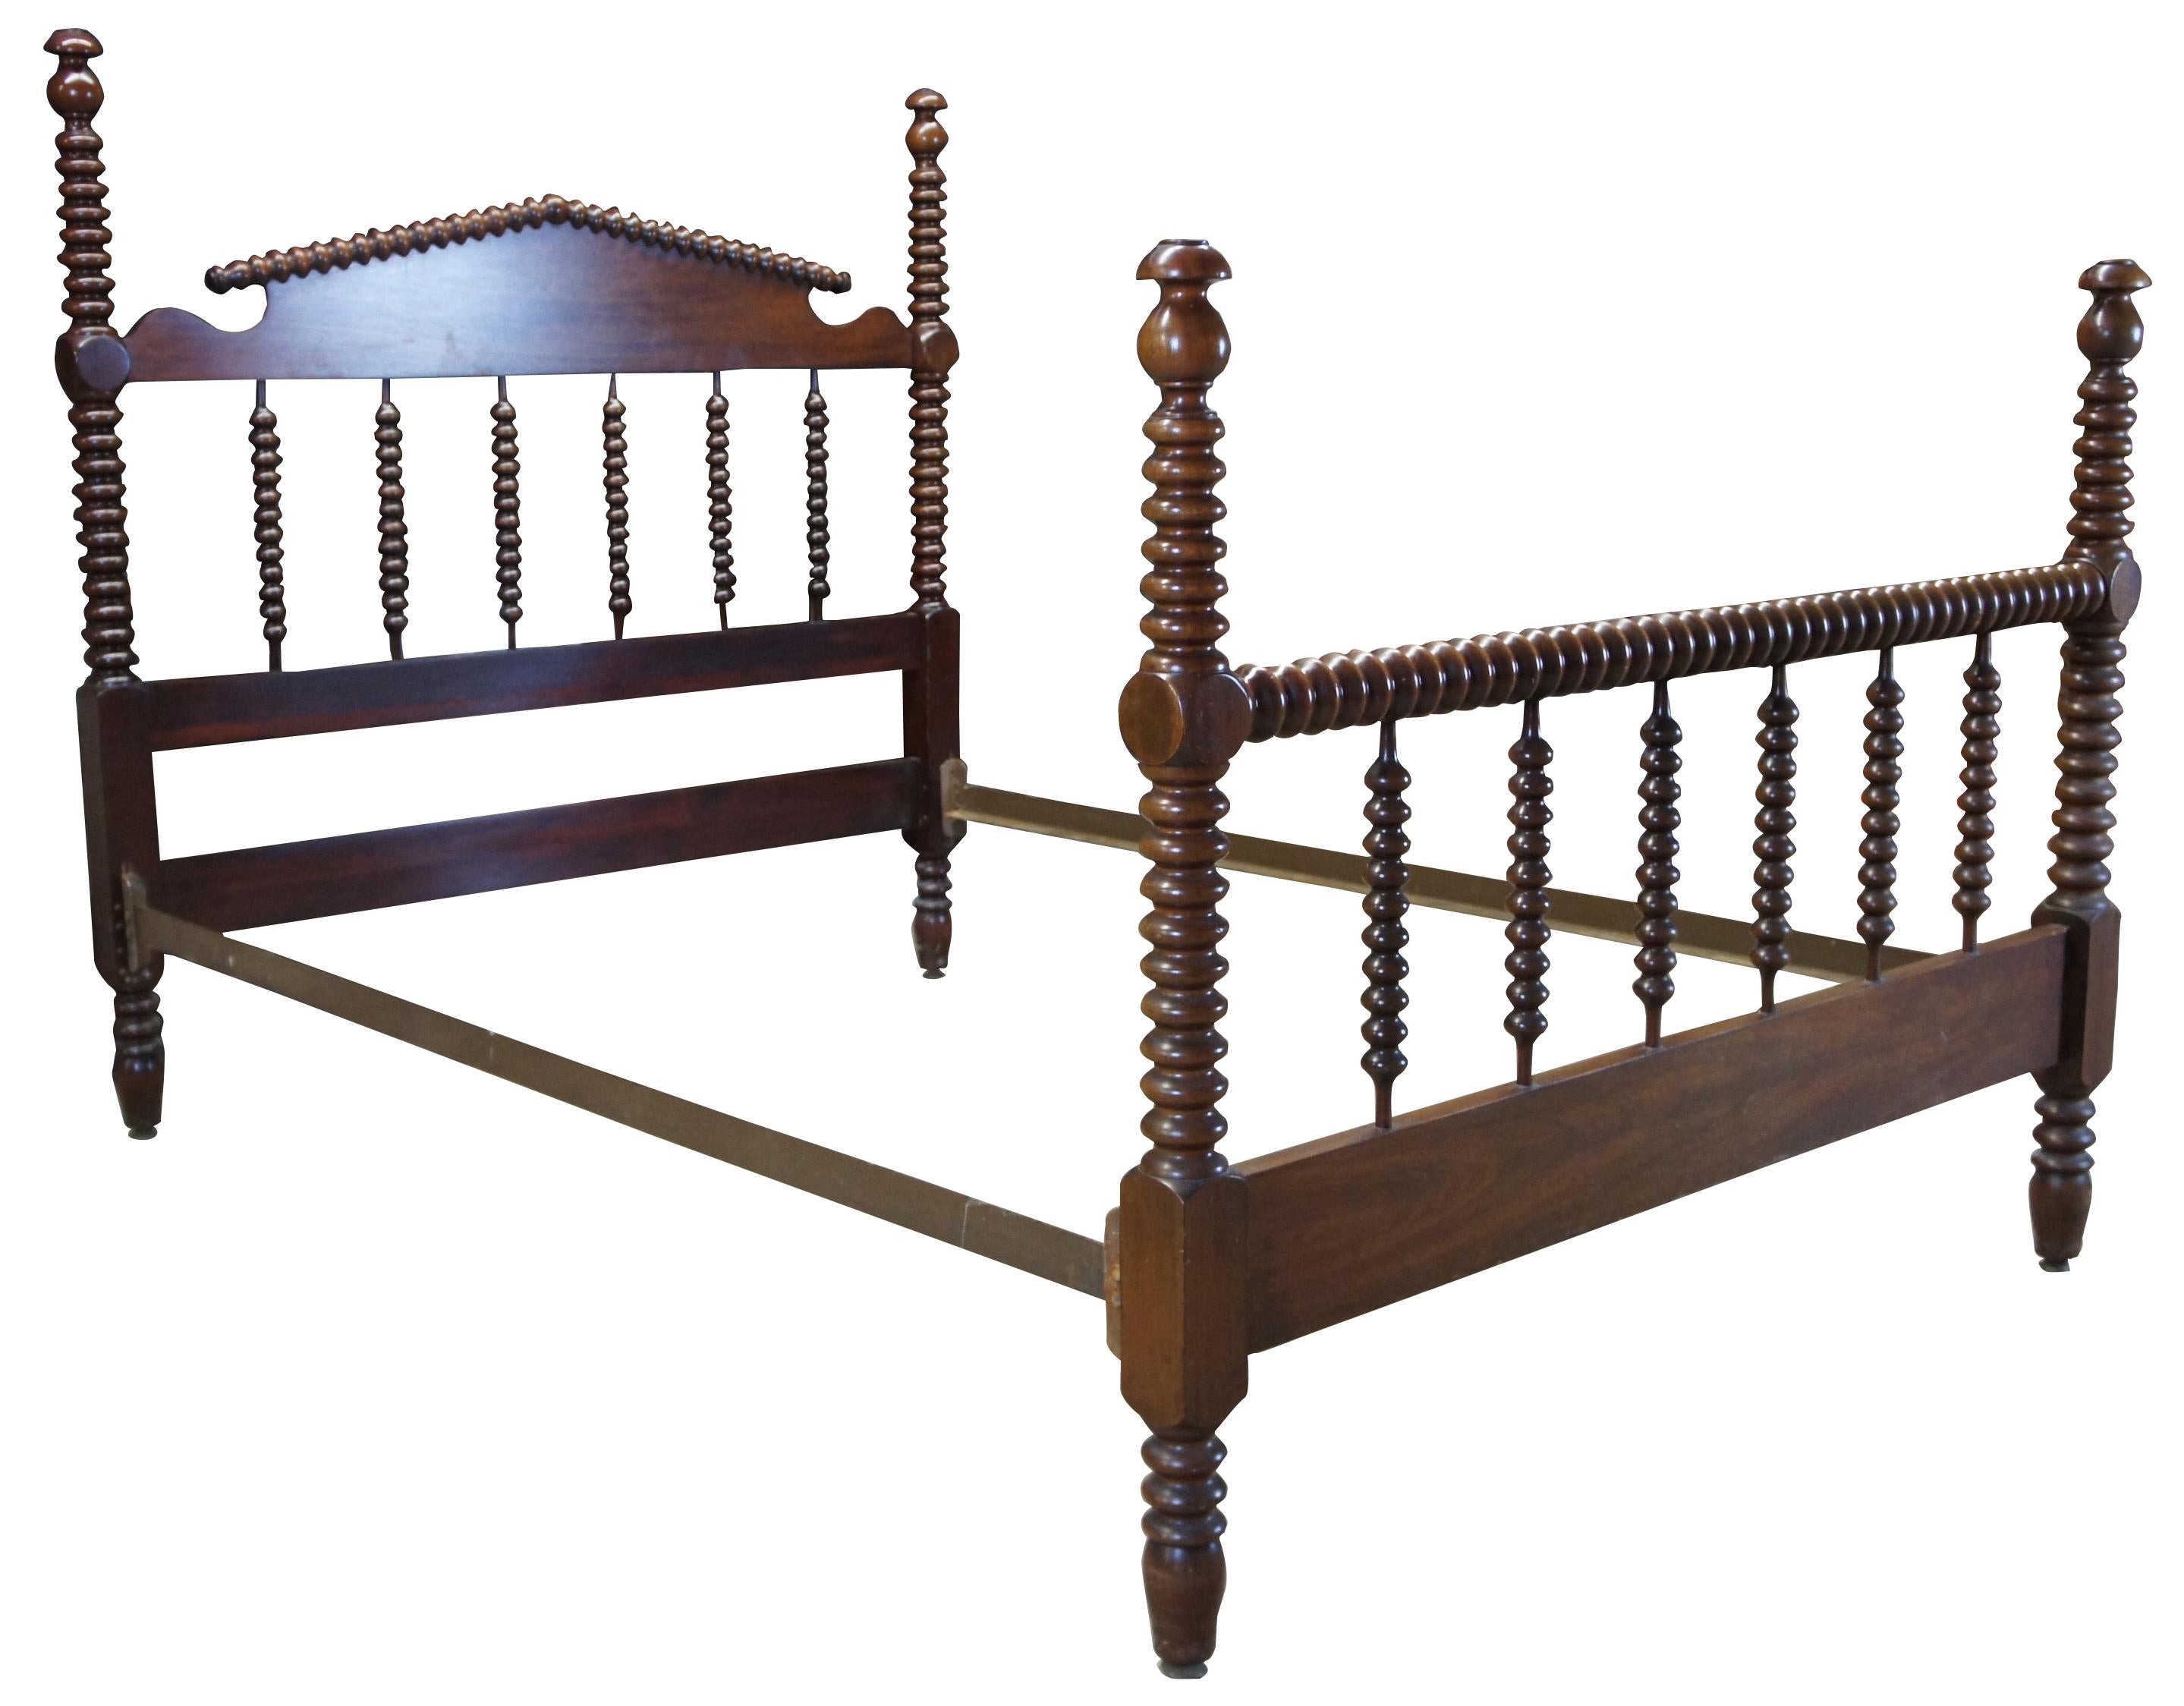 Early 1900s American walnut Jenny Lind / Federal style full size bed. Features ribbed / spooled spindles and posts.
    